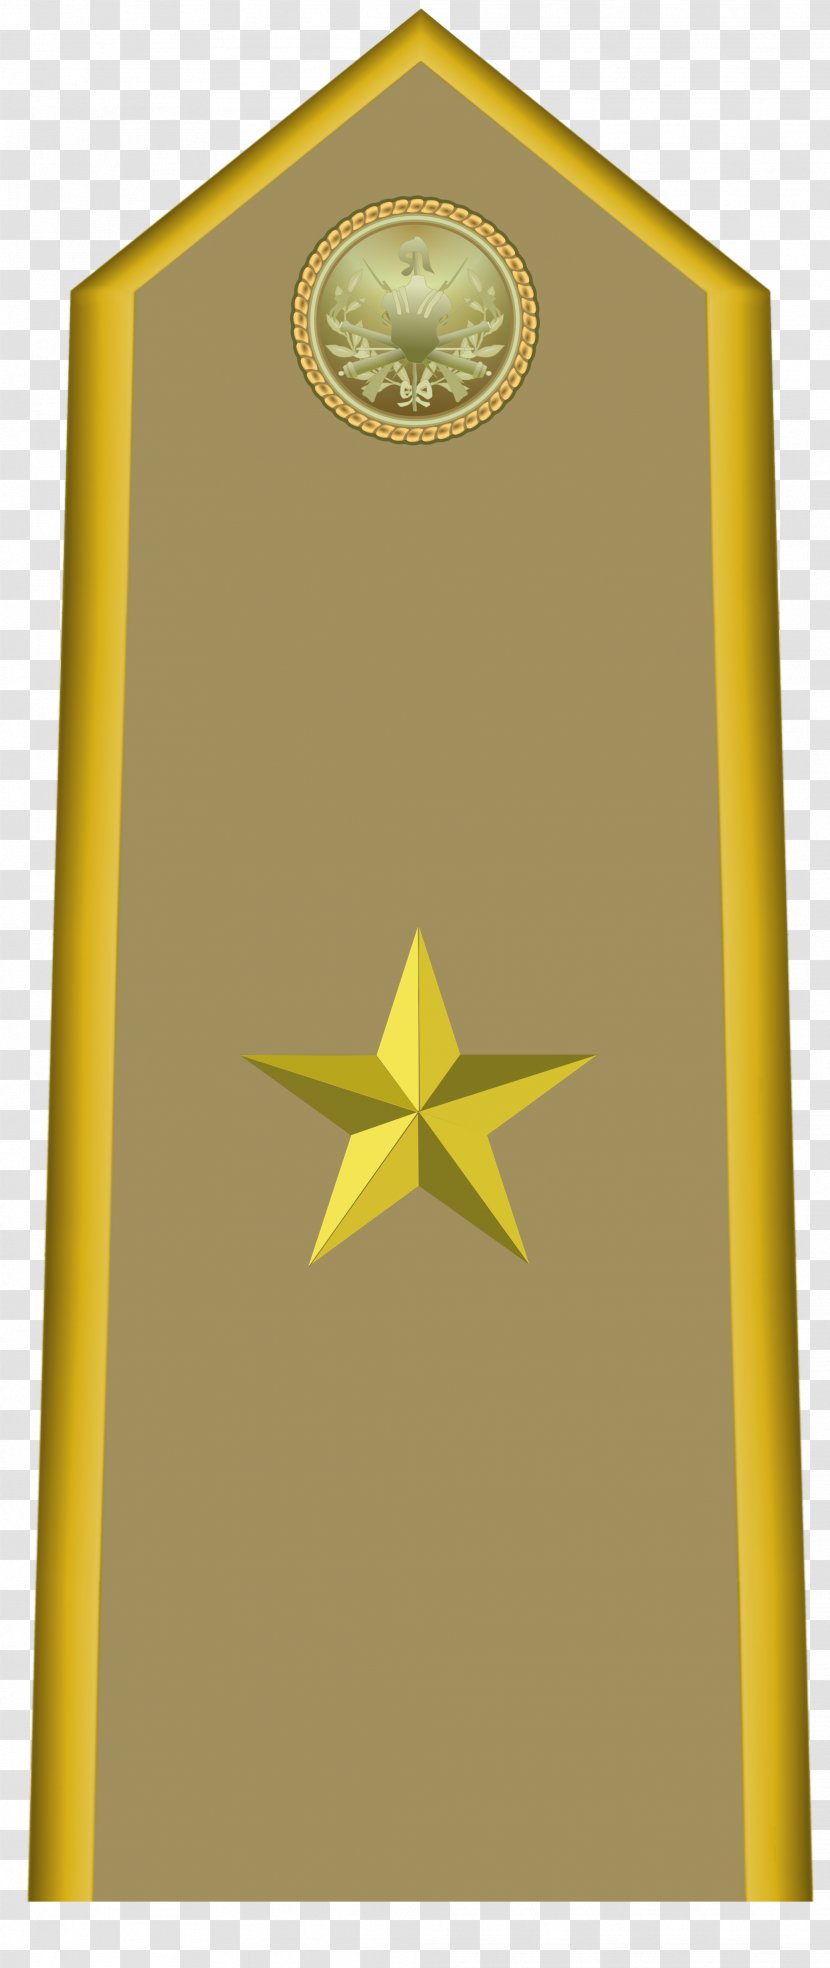 Staff Captain Italian Army Lieutenant Colonel Military Rank - Tanks In The Transparent PNG